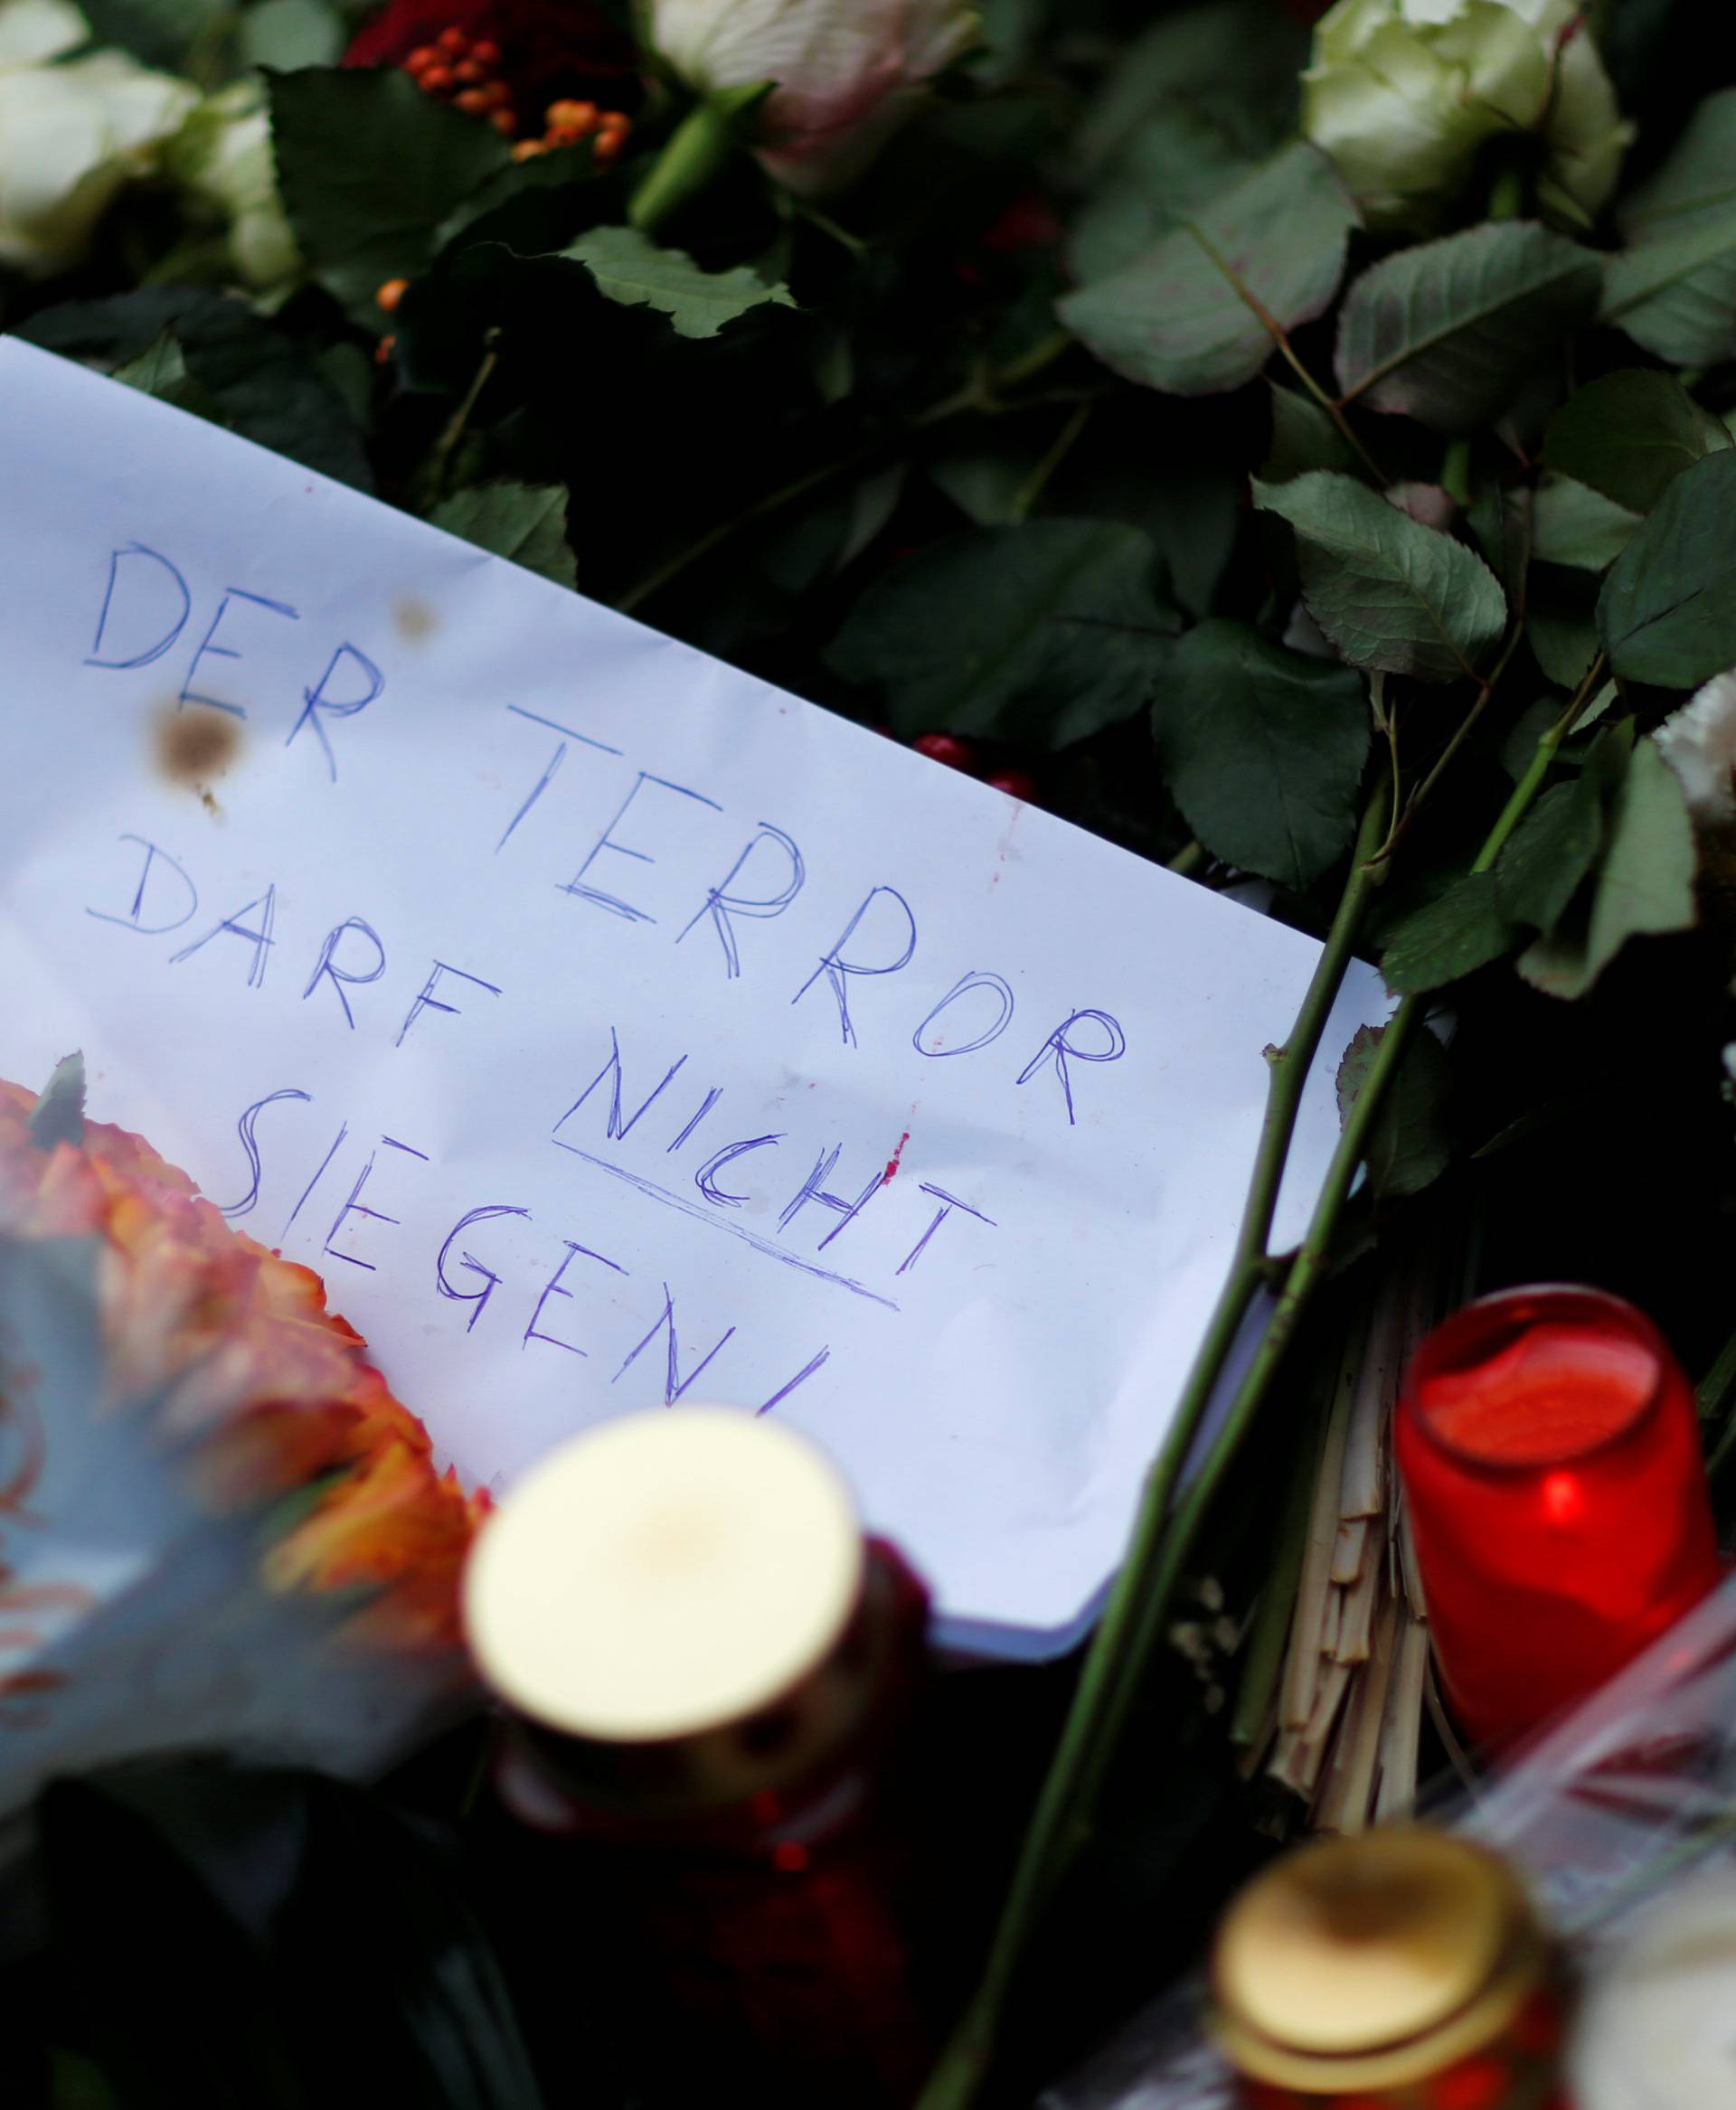 Flowers, candles and a note saying "The terror can not prevail" are placed near the Christmas market in Berlin